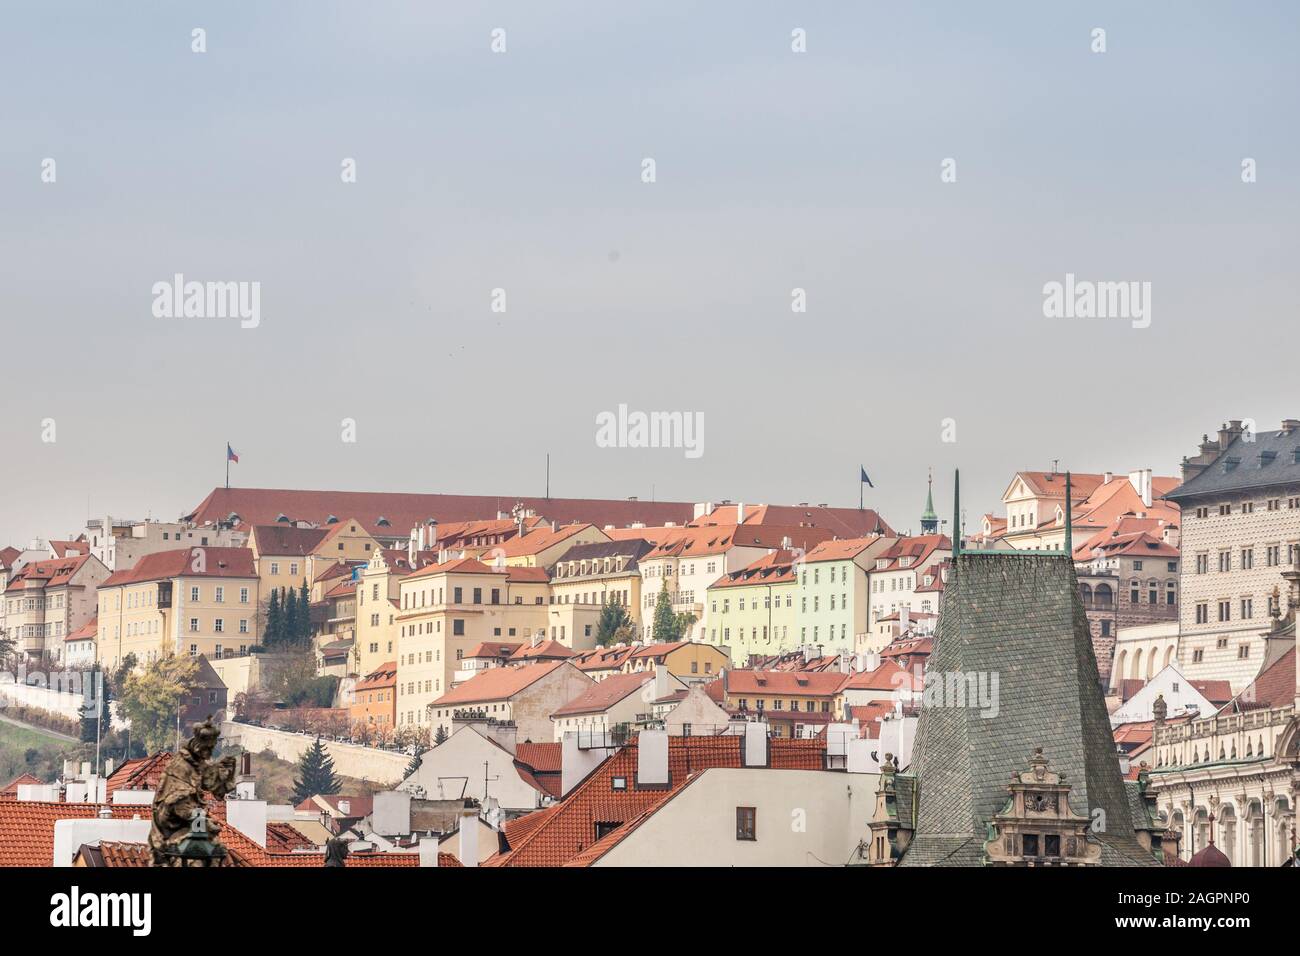 Panorama of the Prague Castle (Prazsky Hrad) hill, also called Hradcany, in Czech Republic, seen from the mala strana district, with its typical baroq Stock Photo